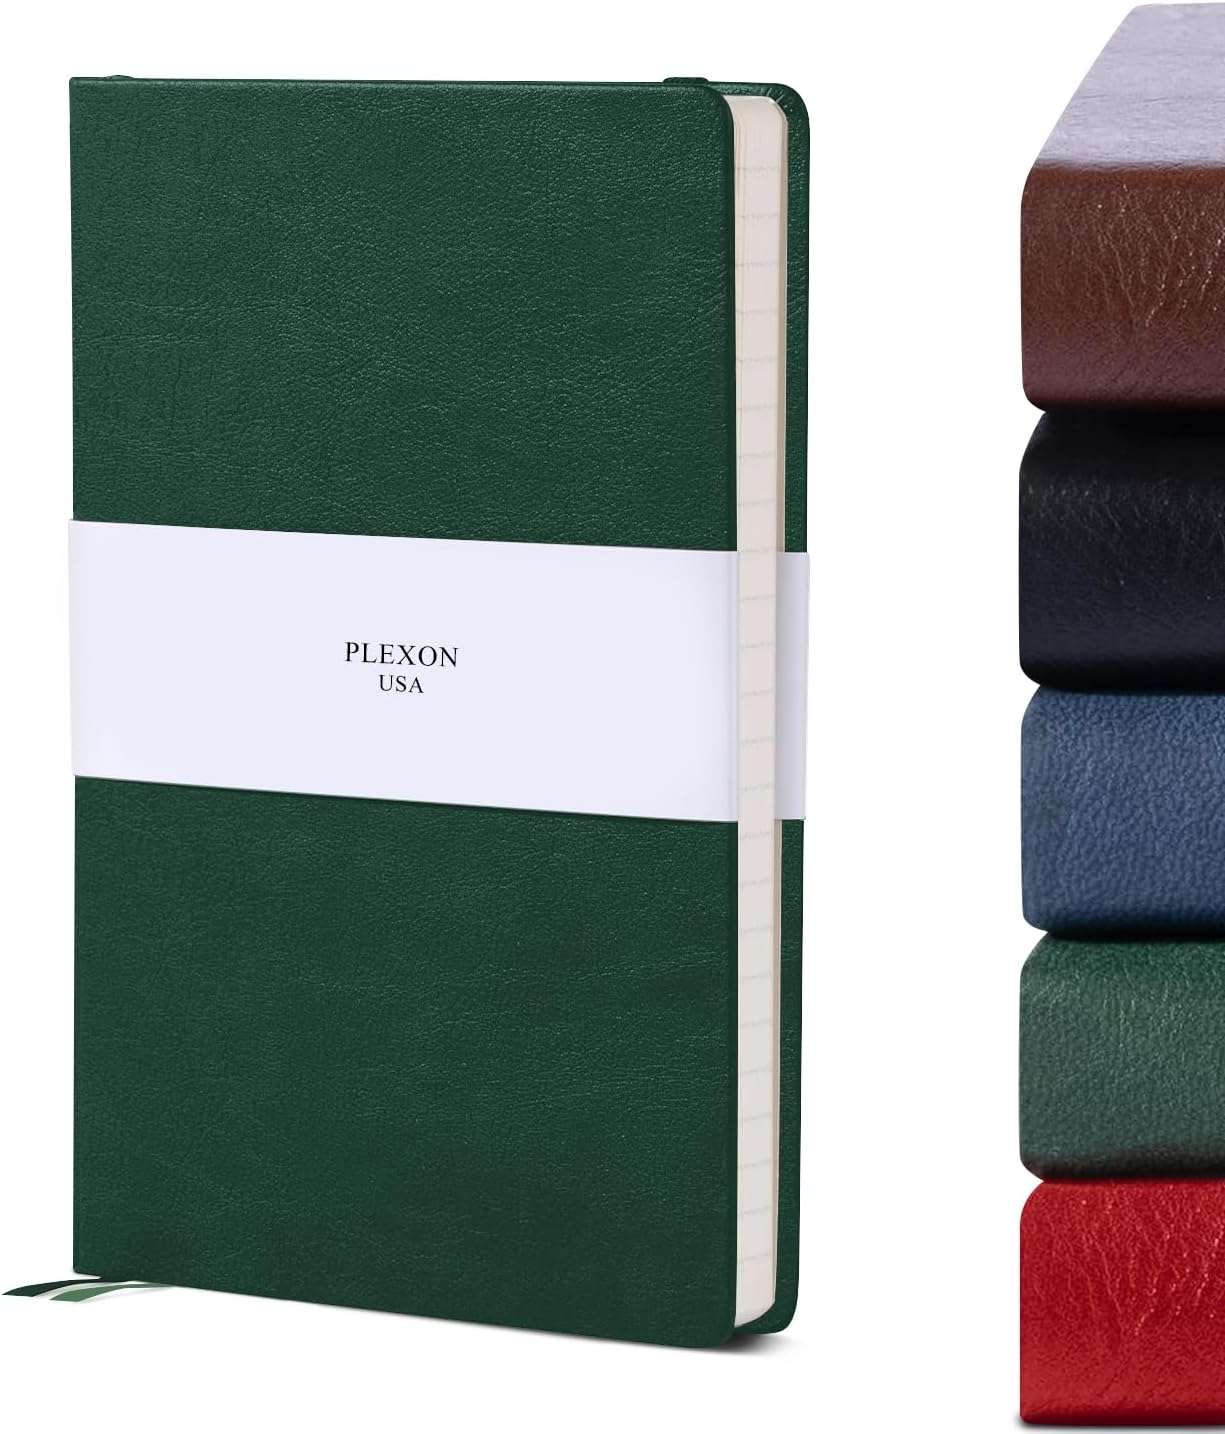 Emerald Green A5 Hardcover Vegan Leather Ruled Notebook with 120 gsm Lined Cream Paper and Gift Box, 80 Sheets - 1